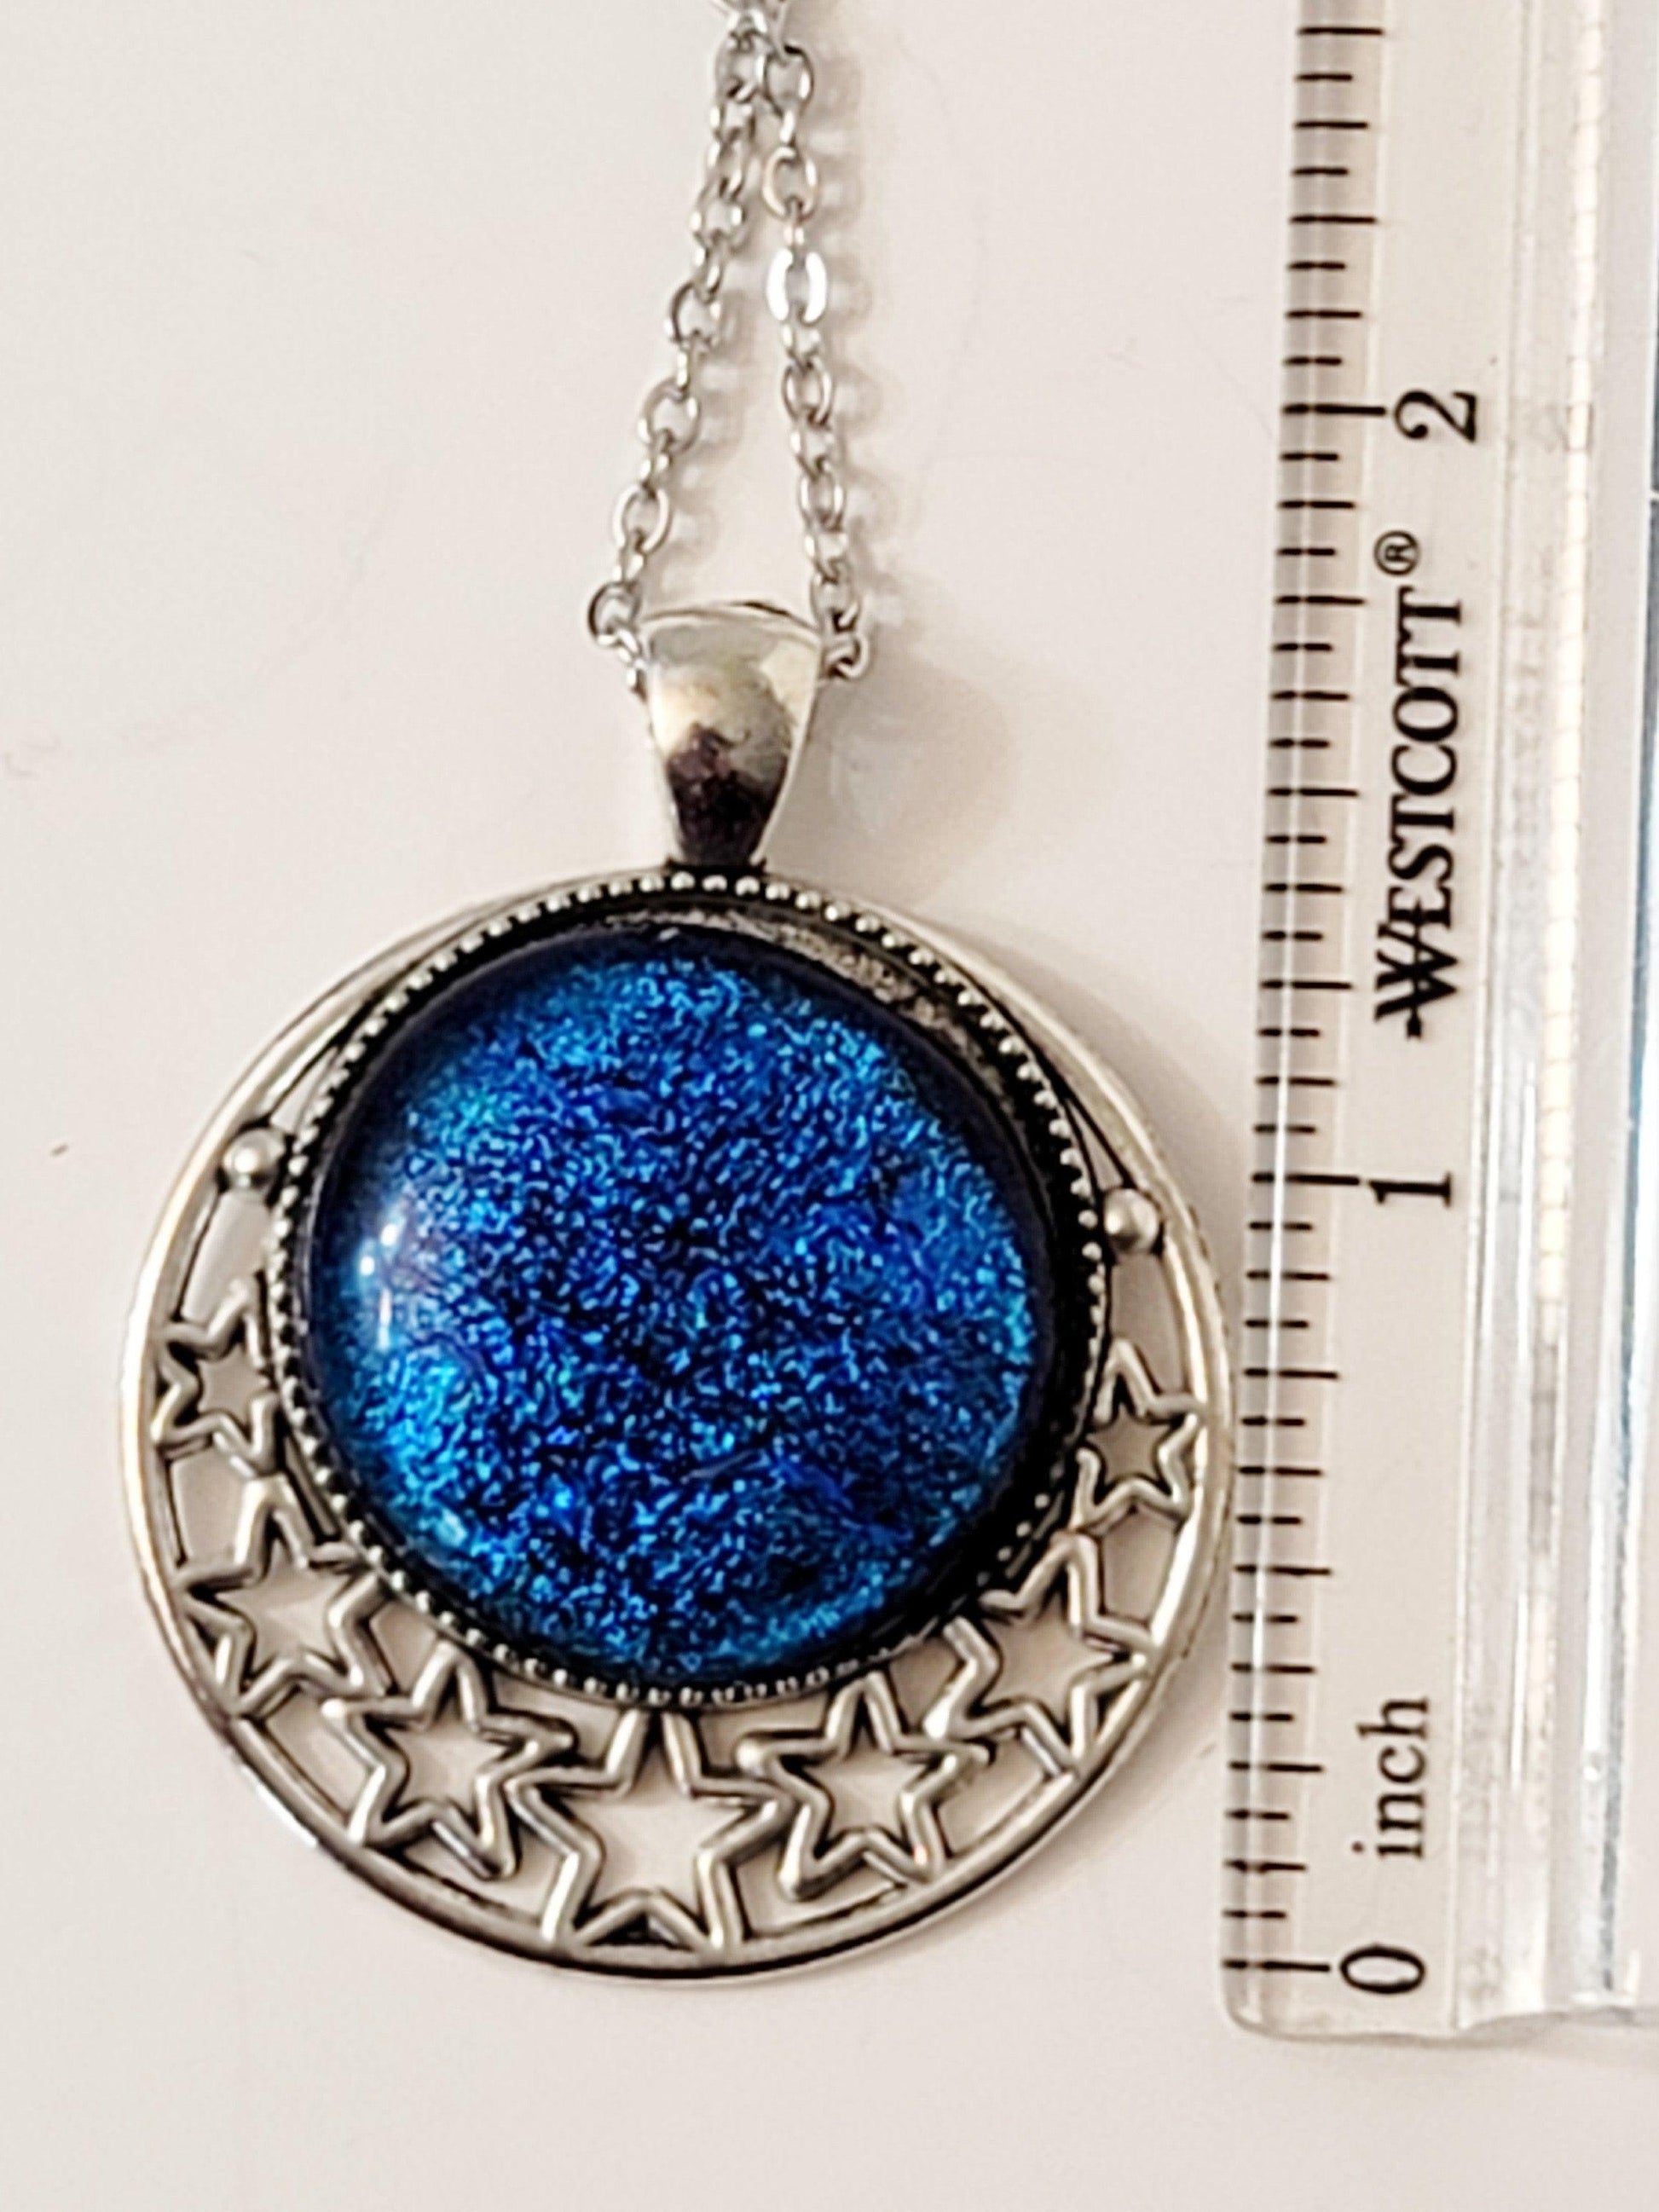 Silver tone Stars Pendant with Blue dichroic glass cabochon on a 20 inch steel metal chain. seeds glassworks fused glass jewelry